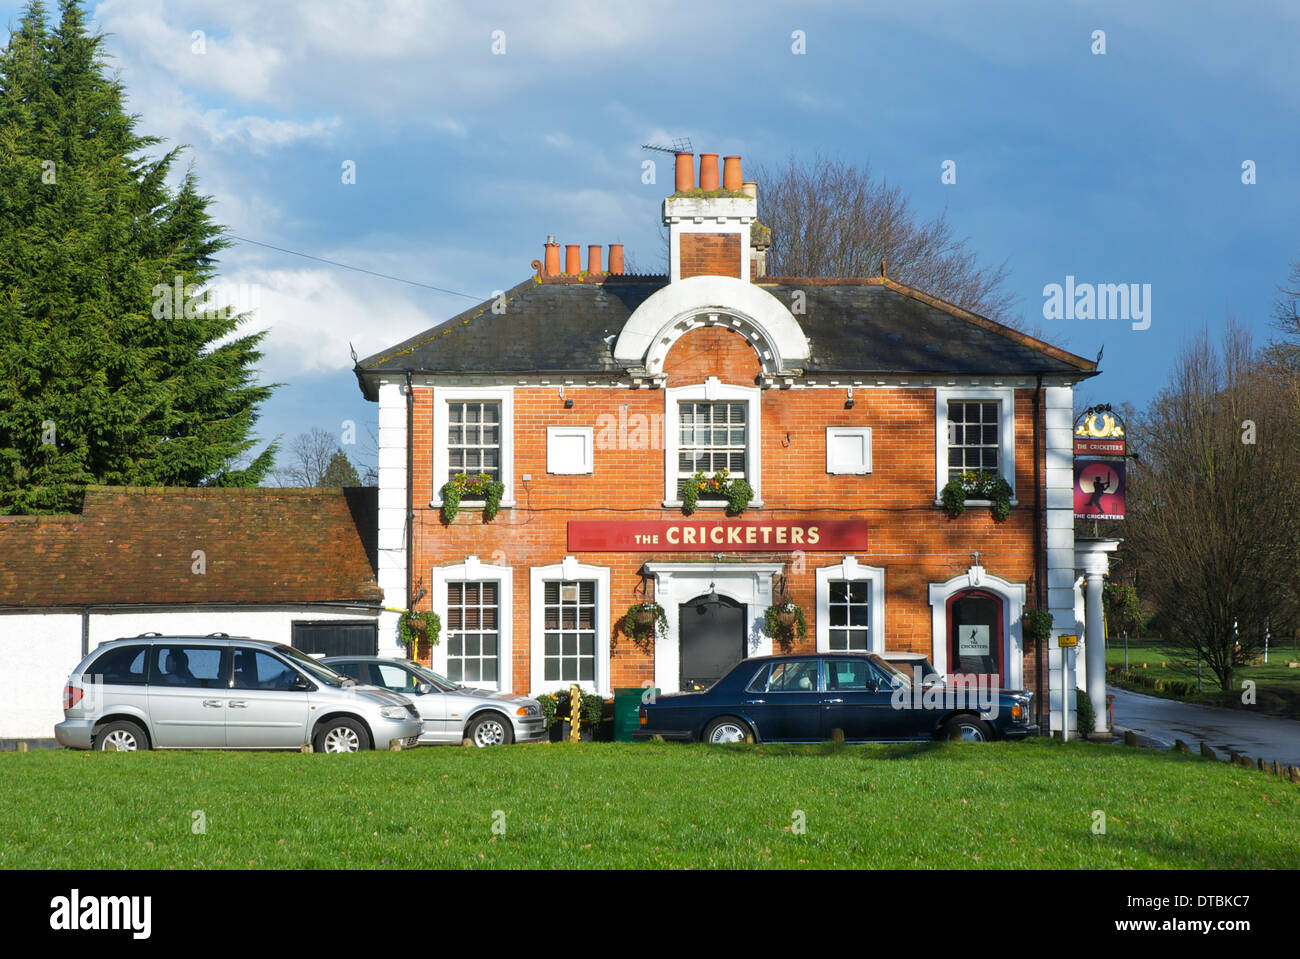 The Cricketers pub & Restaurant, in the village of Hartley Wintney, Hampshire, England uk Stock Photo